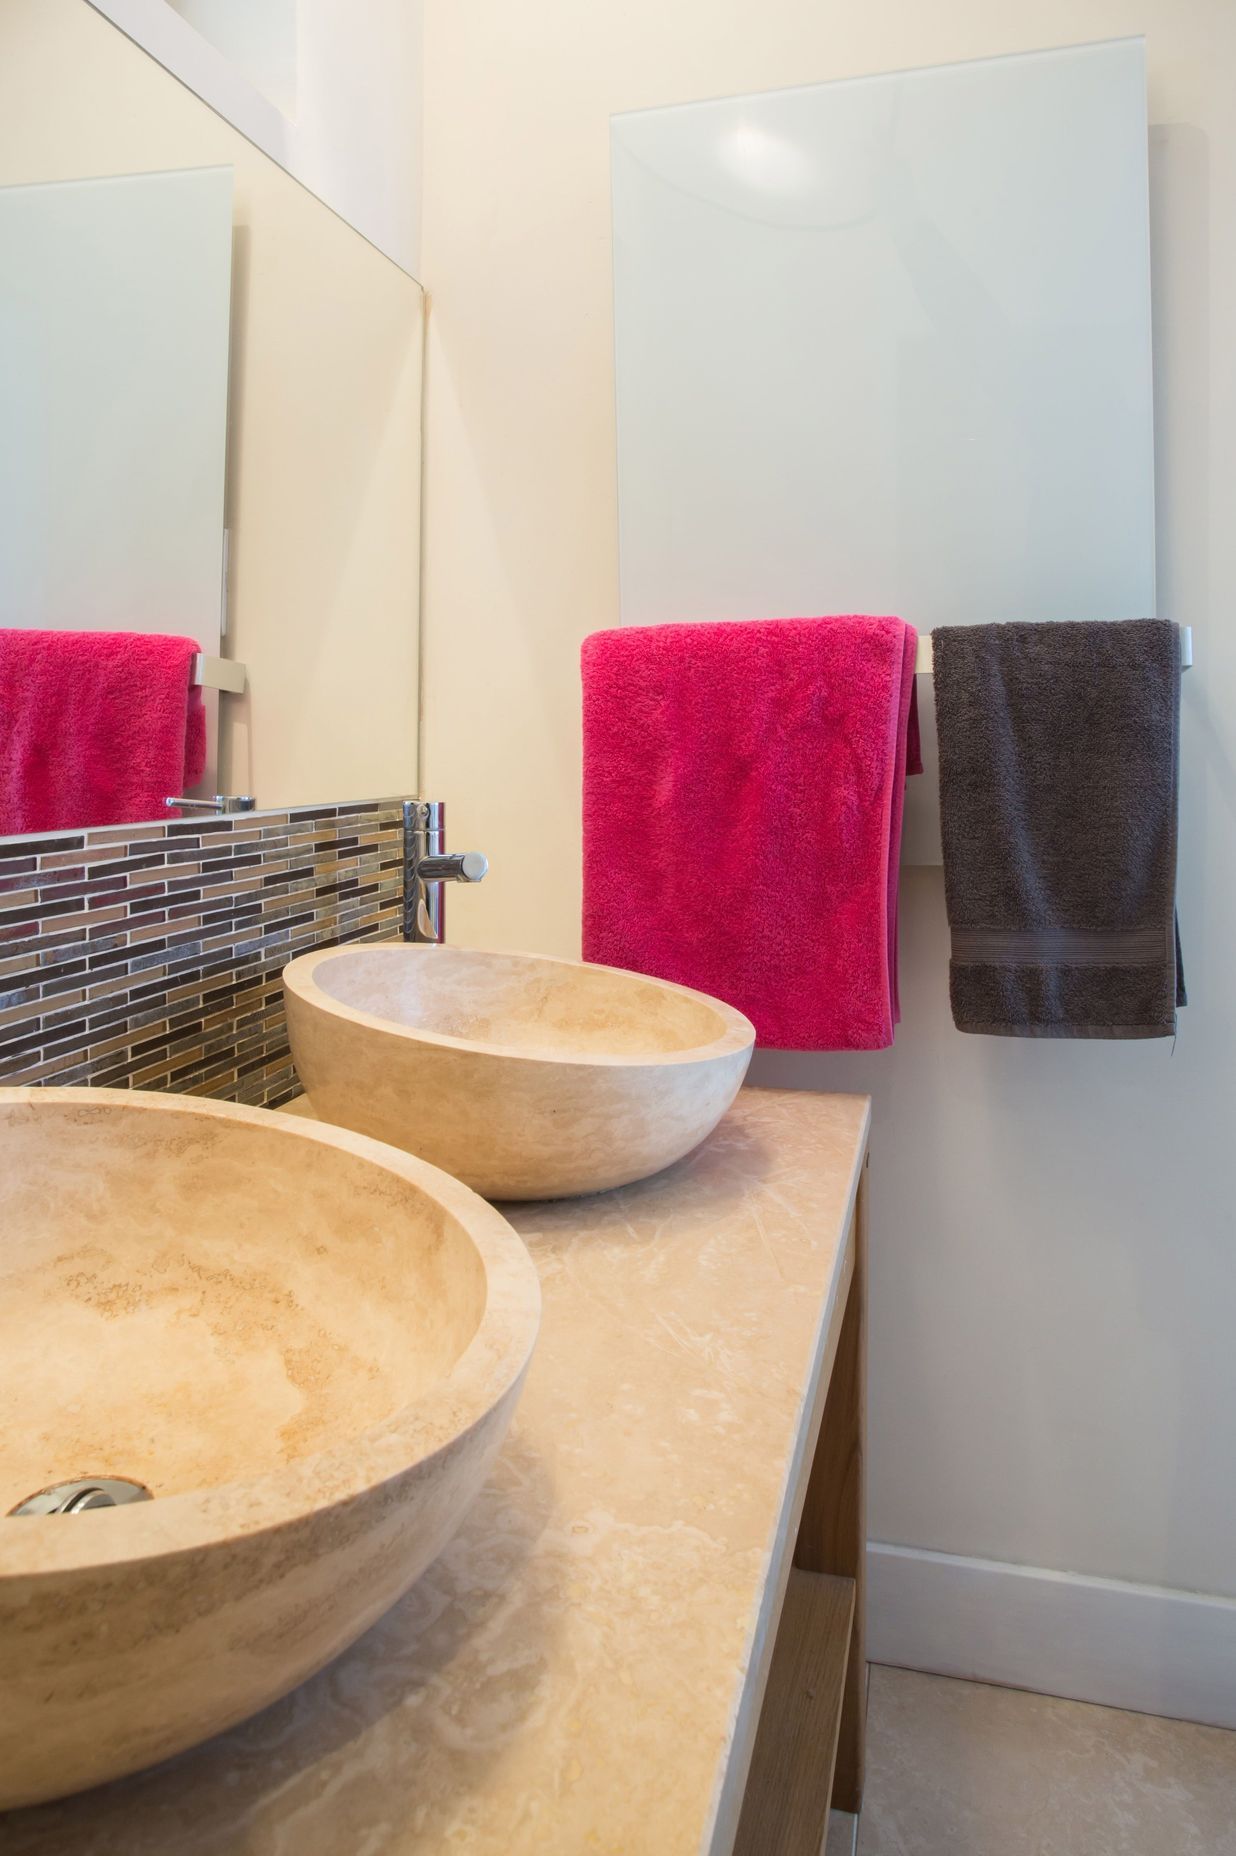 Infrared mirror heater panels keep bathroom walls and fittings warm, dry and free of mould.